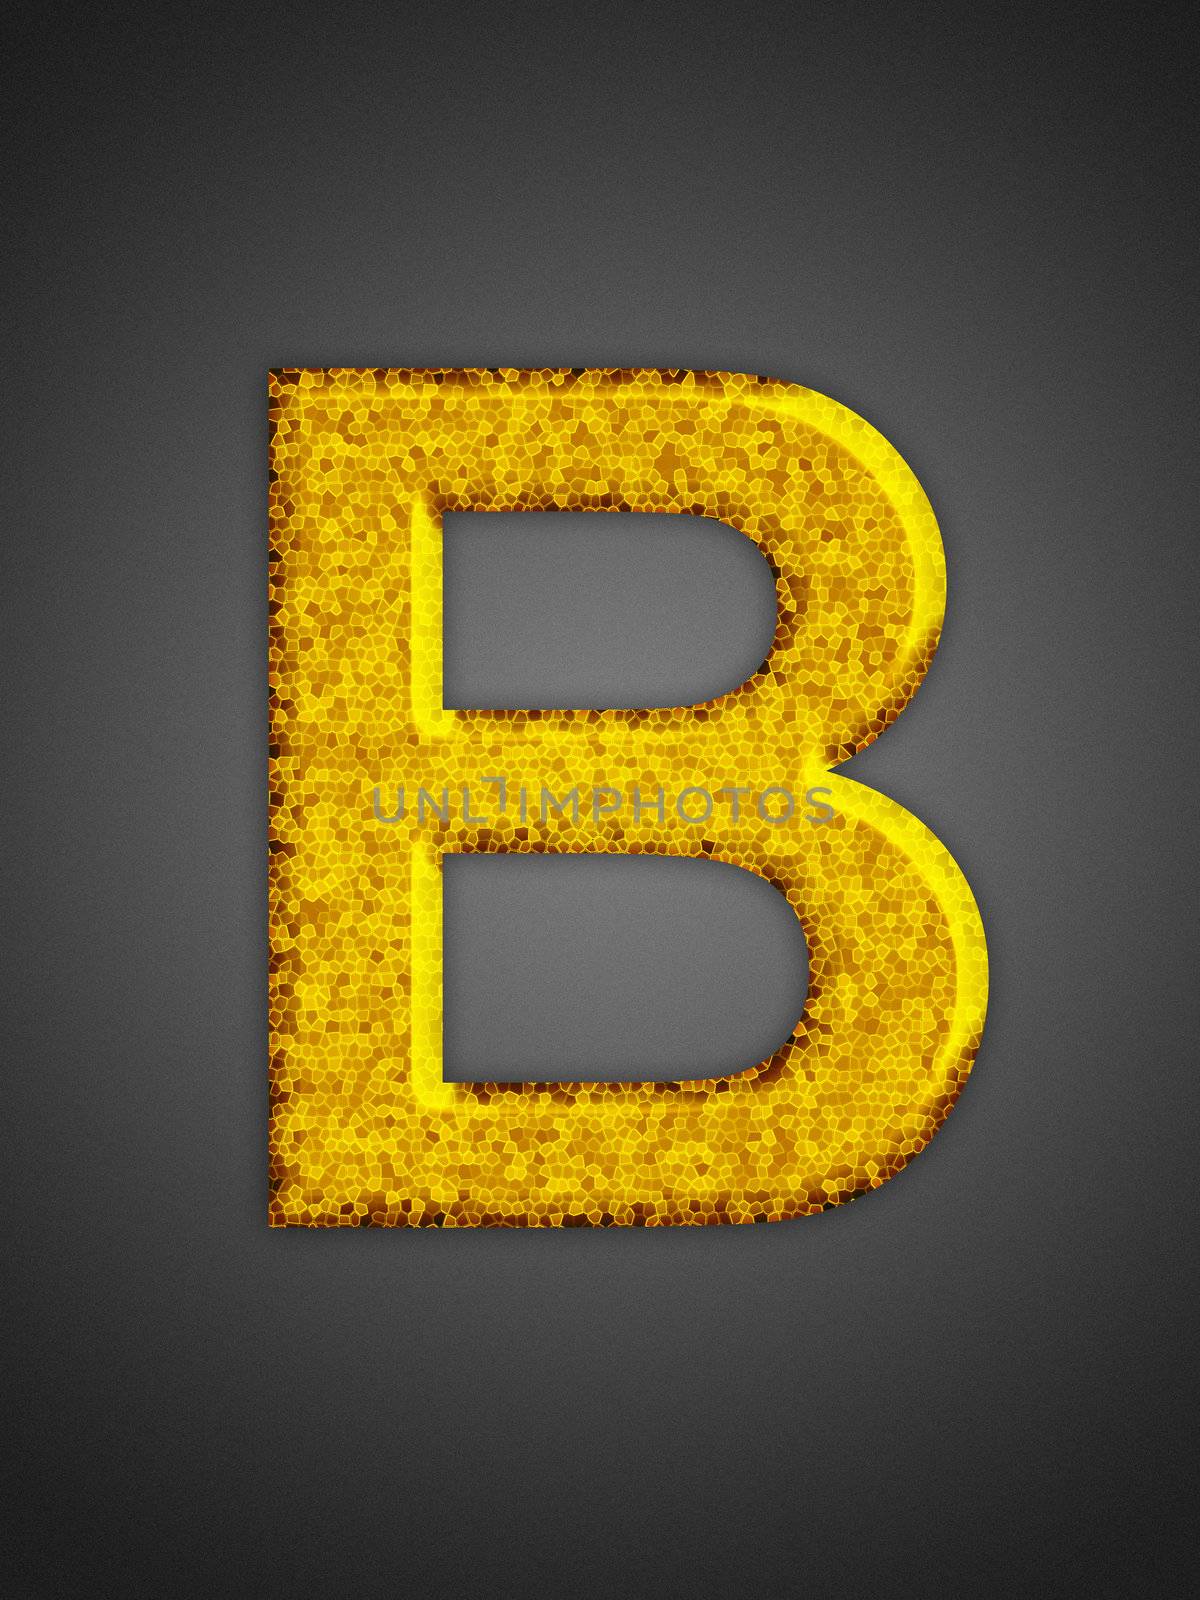 Beautiful abstract party symbol. Yellow glowing font.